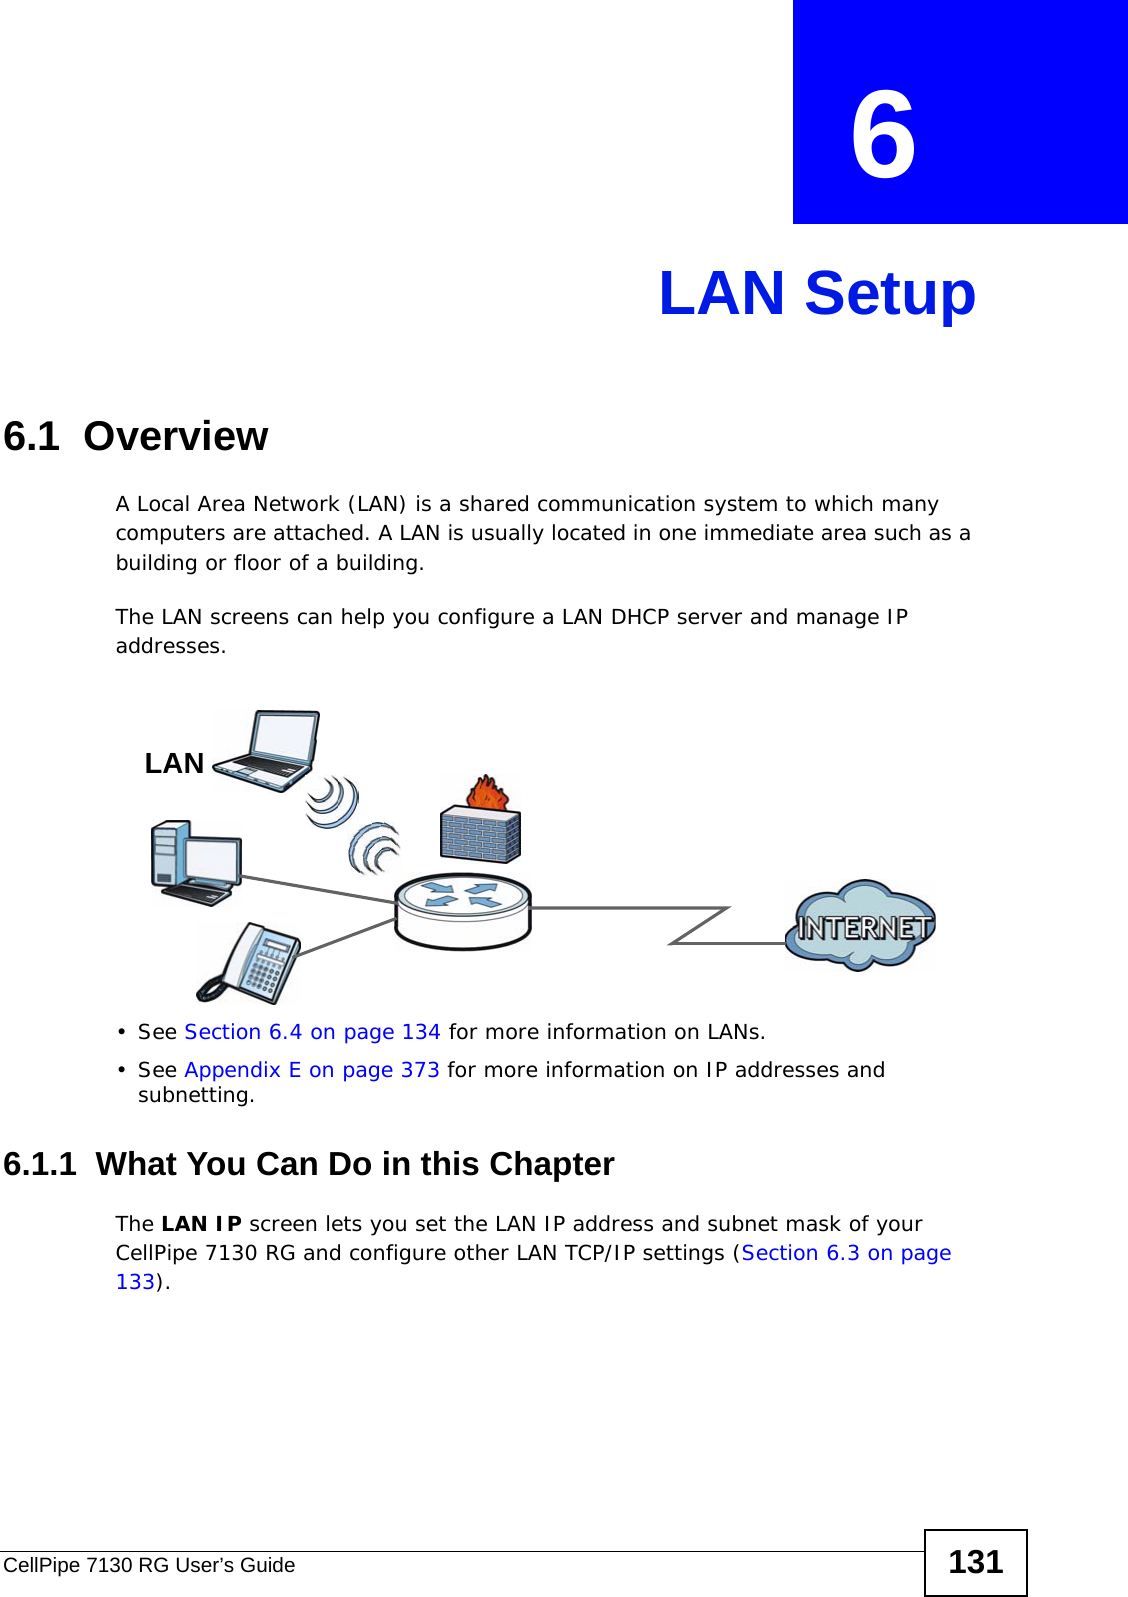 CellPipe 7130 RG User’s Guide 131CHAPTER  6 LAN Setup6.1  Overview  A Local Area Network (LAN) is a shared communication system to which many computers are attached. A LAN is usually located in one immediate area such as a building or floor of a building.The LAN screens can help you configure a LAN DHCP server and manage IP addresses.• See Section 6.4 on page 134 for more information on LANs.• See Appendix E on page 373 for more information on IP addresses and subnetting.6.1.1  What You Can Do in this ChapterThe LAN IP screen lets you set the LAN IP address and subnet mask of your CellPipe 7130 RG and configure other LAN TCP/IP settings (Section 6.3 on page 133).LAN